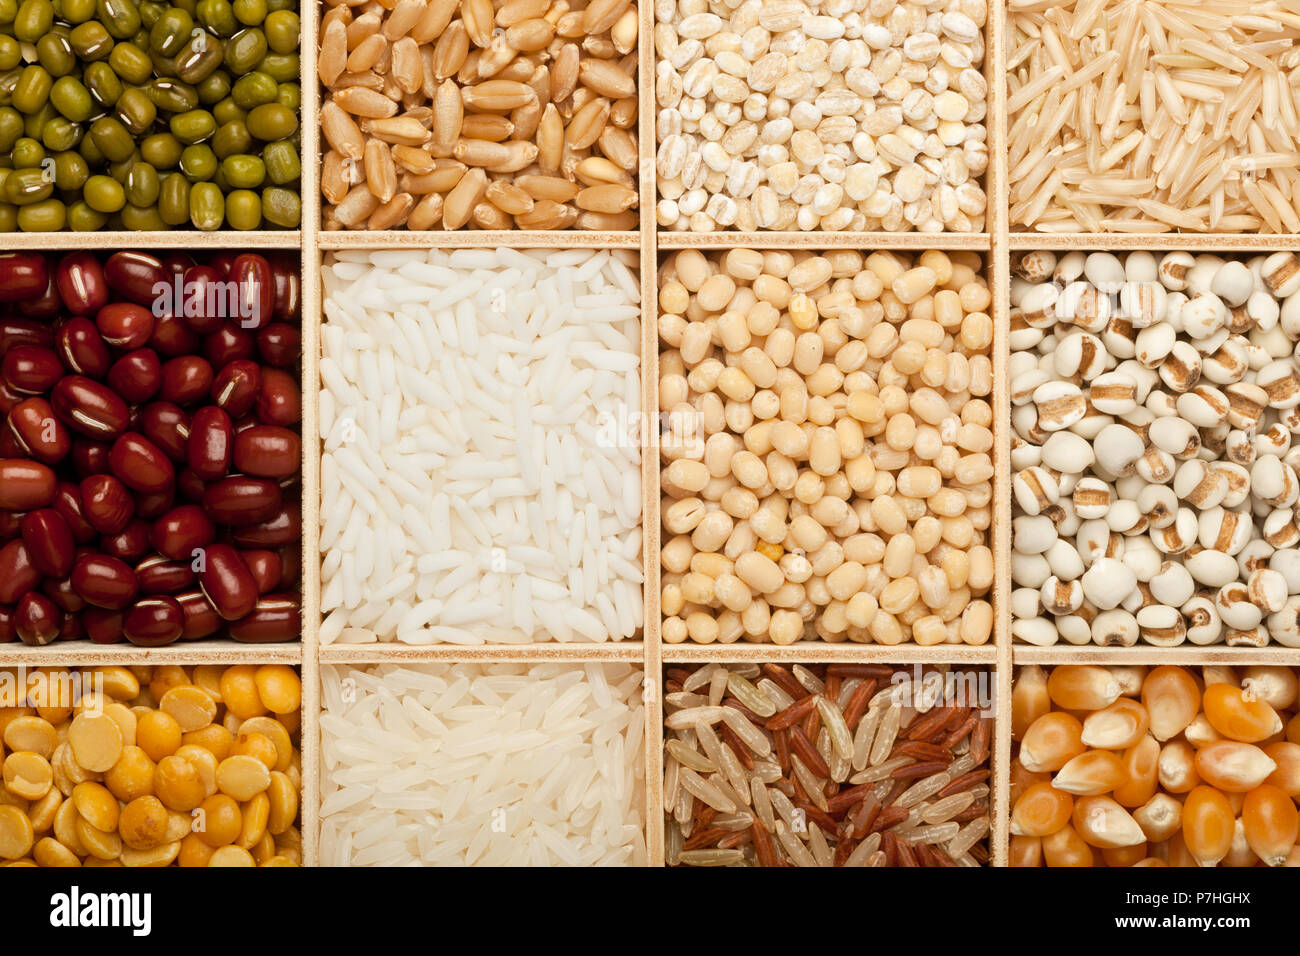 Closeup of different types of grains and beans Stock Photo